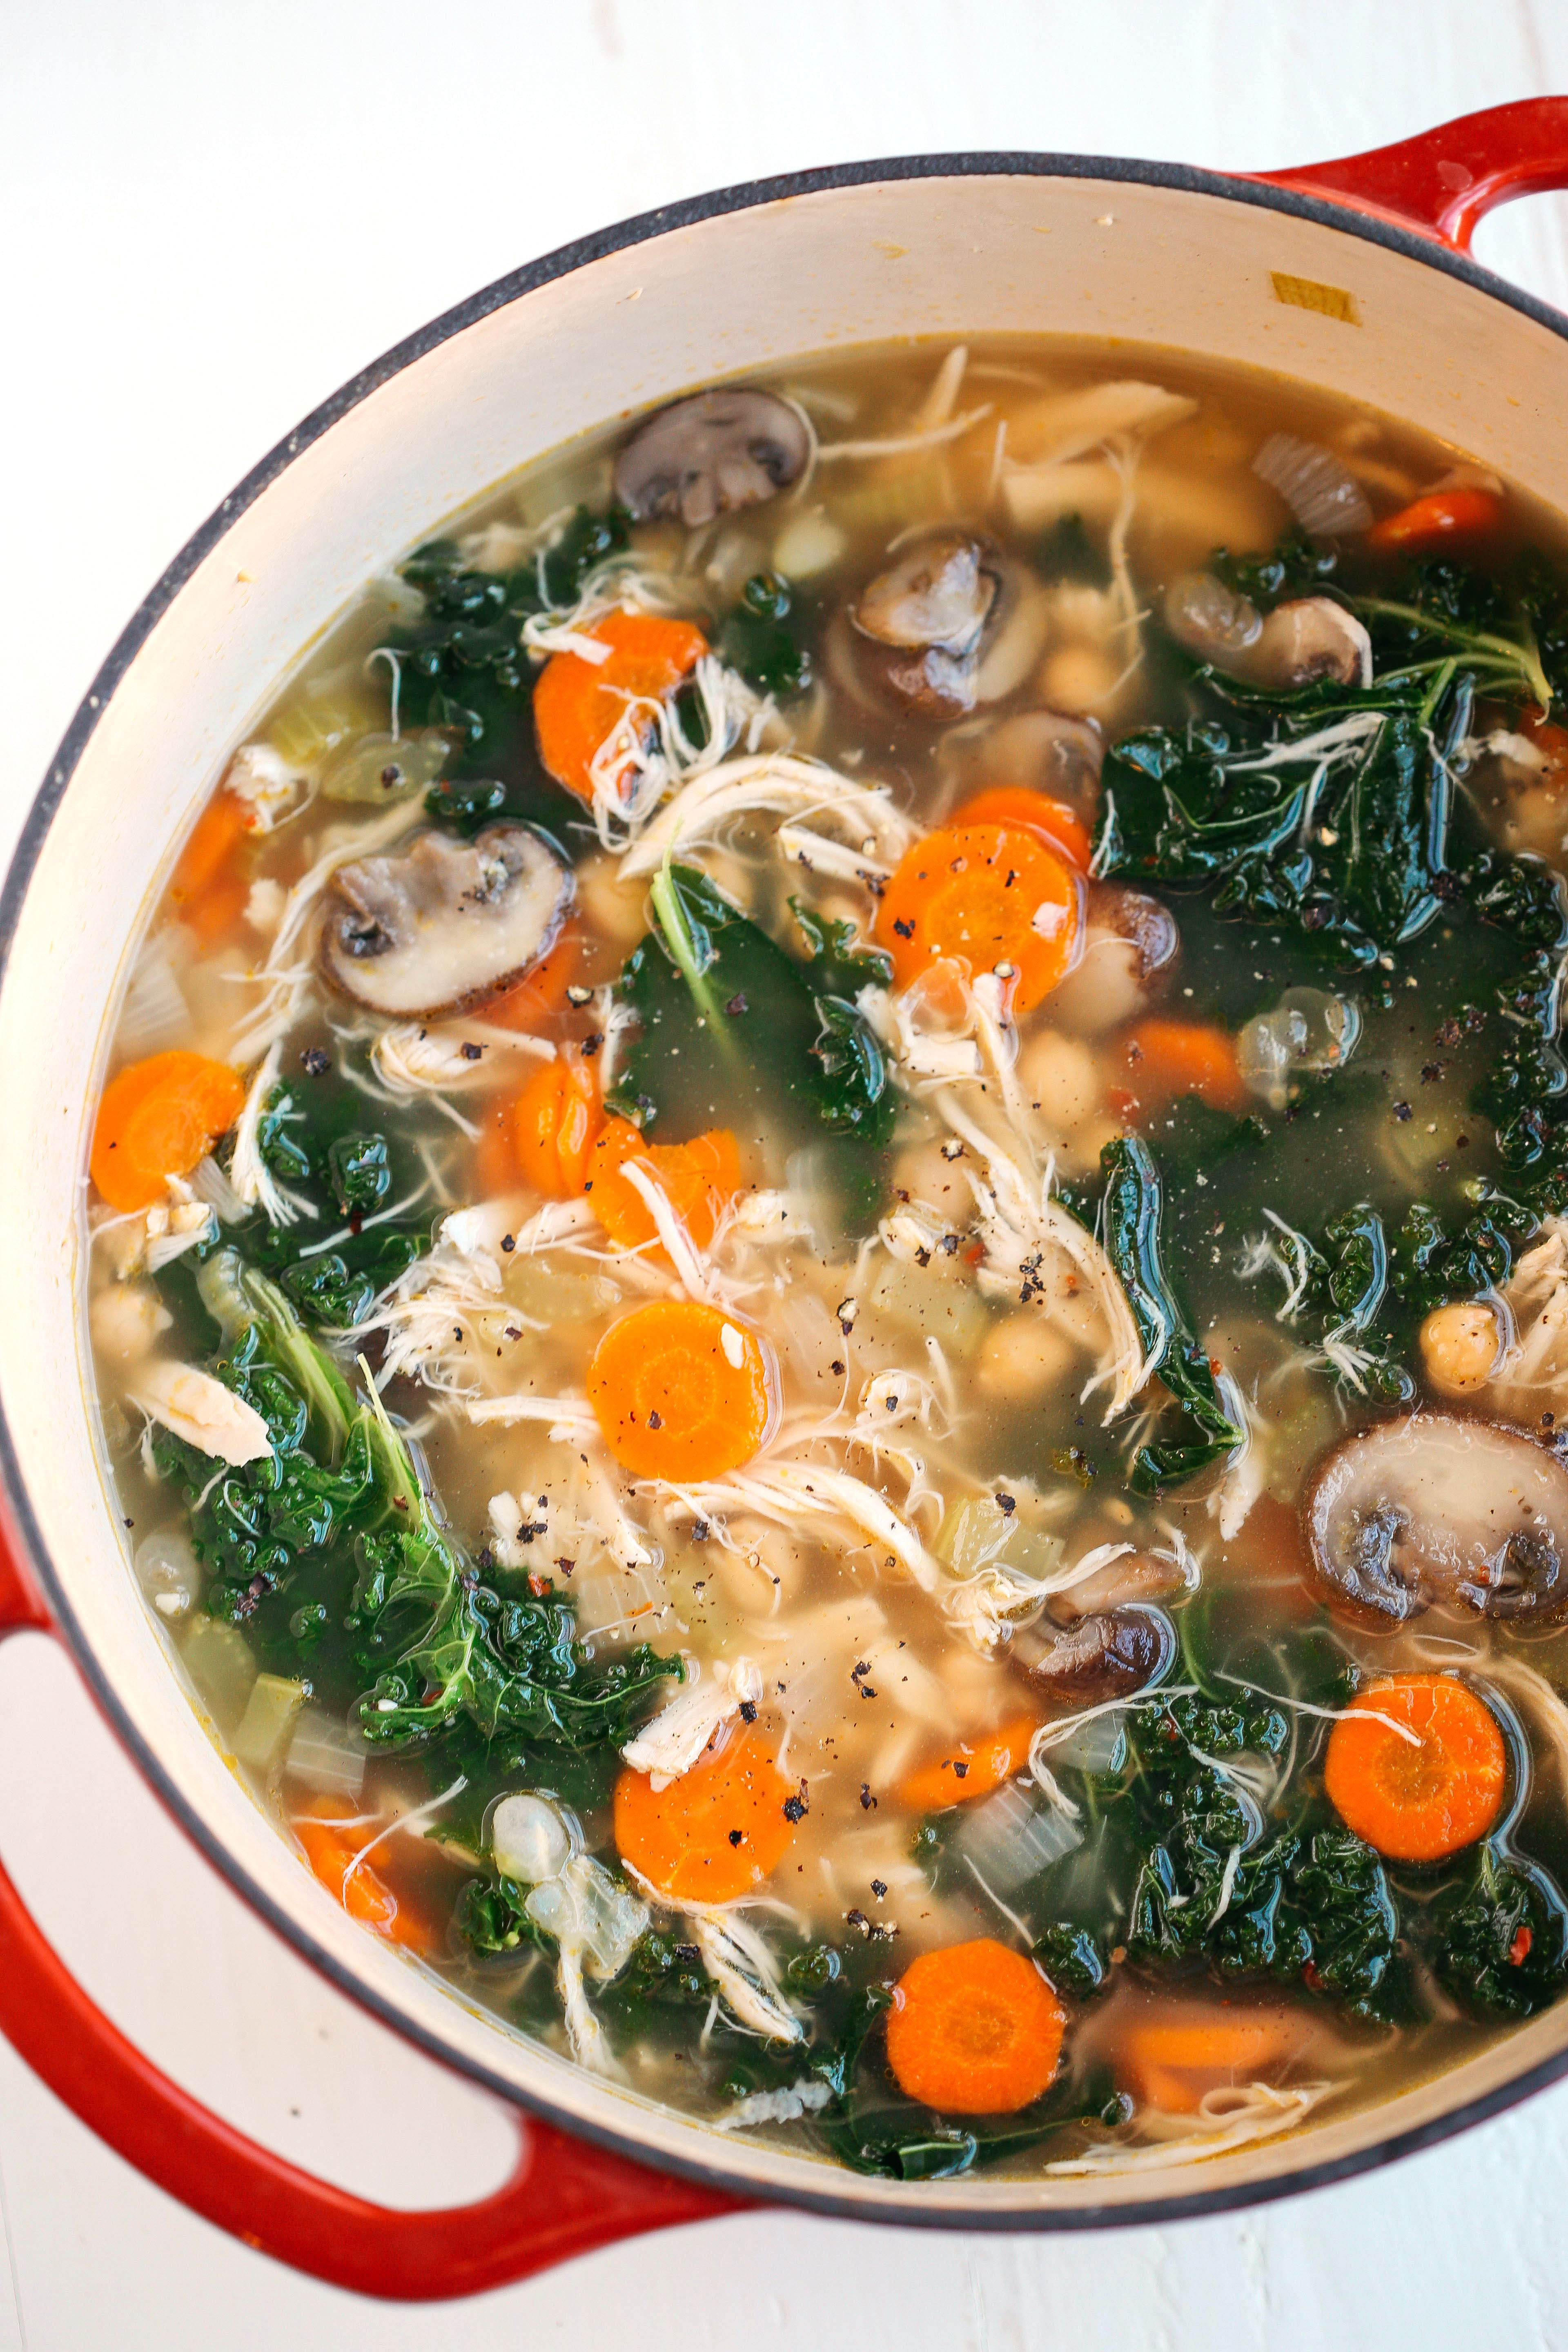 This Detox Immune-Boosting Chicken Soup is the perfect remedy for cold and flu season filled with tons of antioxidants that boost immunity and keep you warm all winter long!